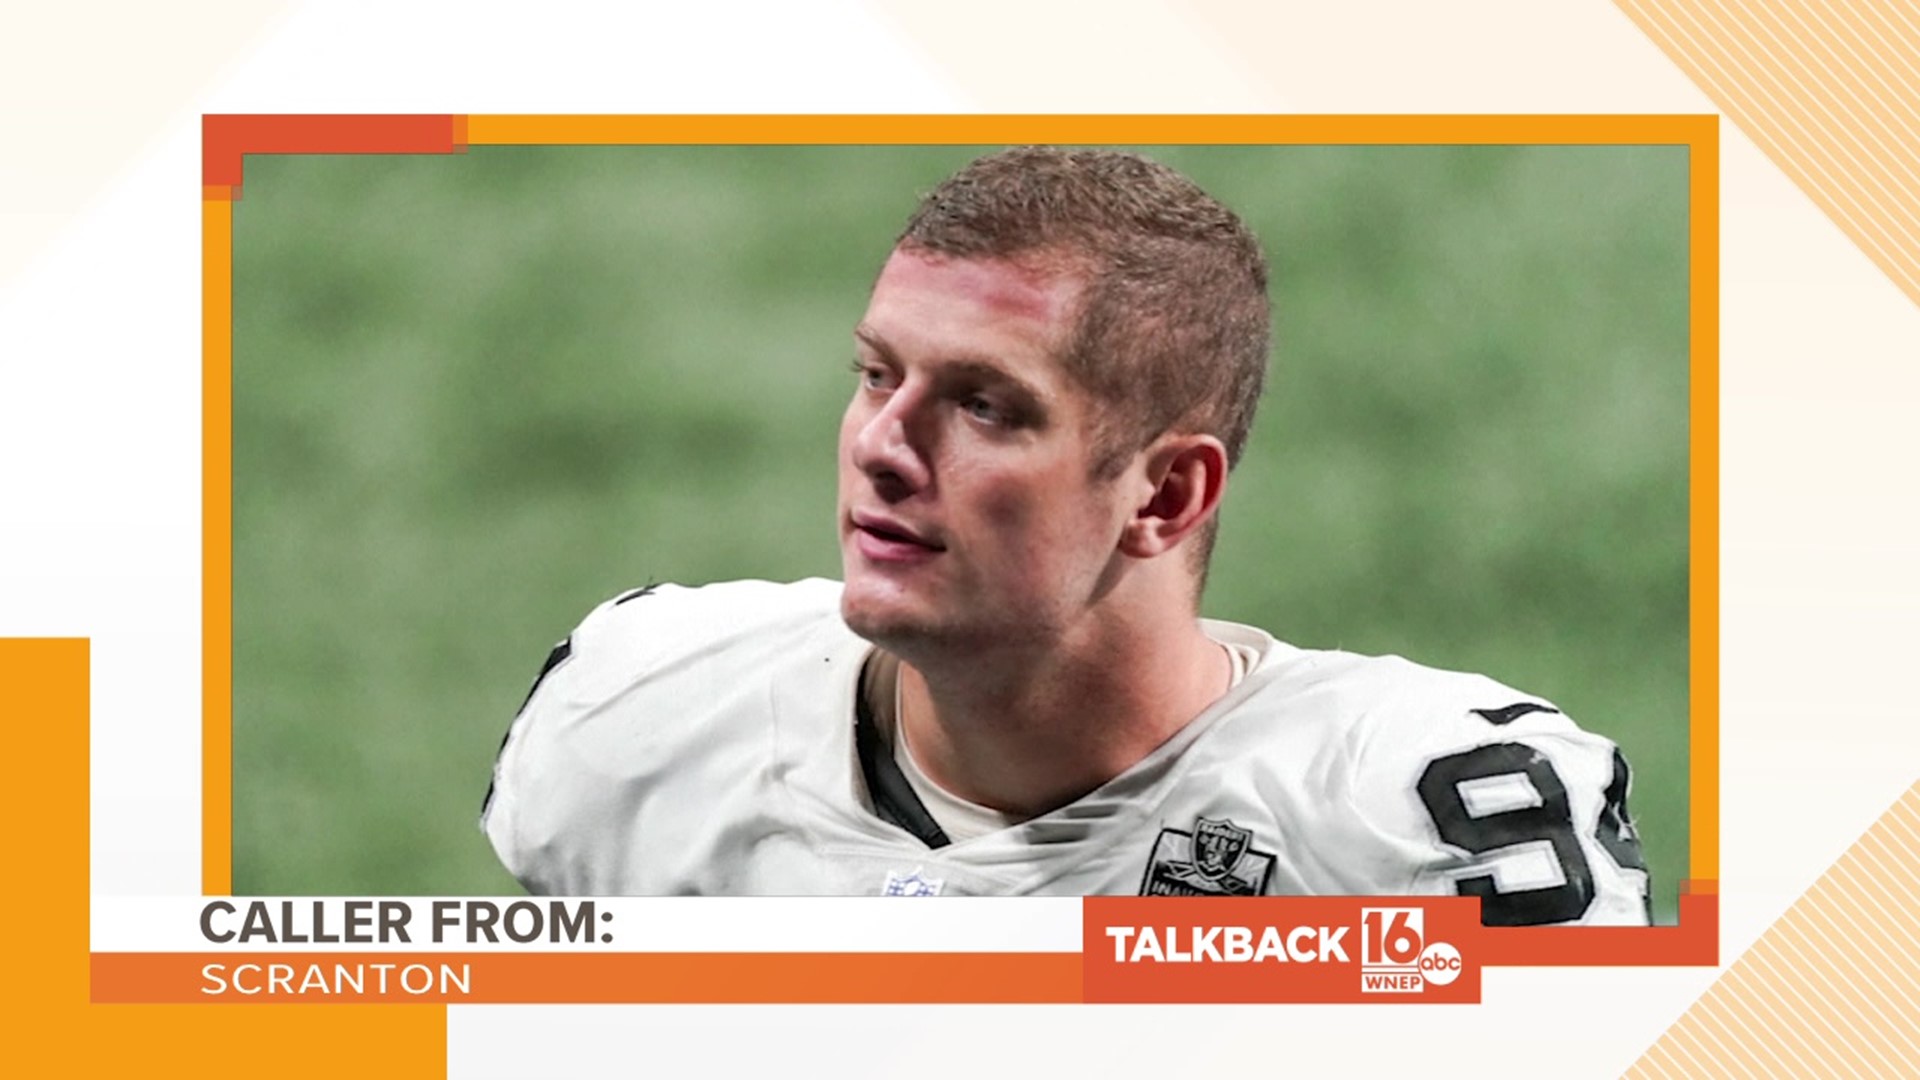 A caller from Scranton says Nassib shouldn't be shy about coming out as gay.